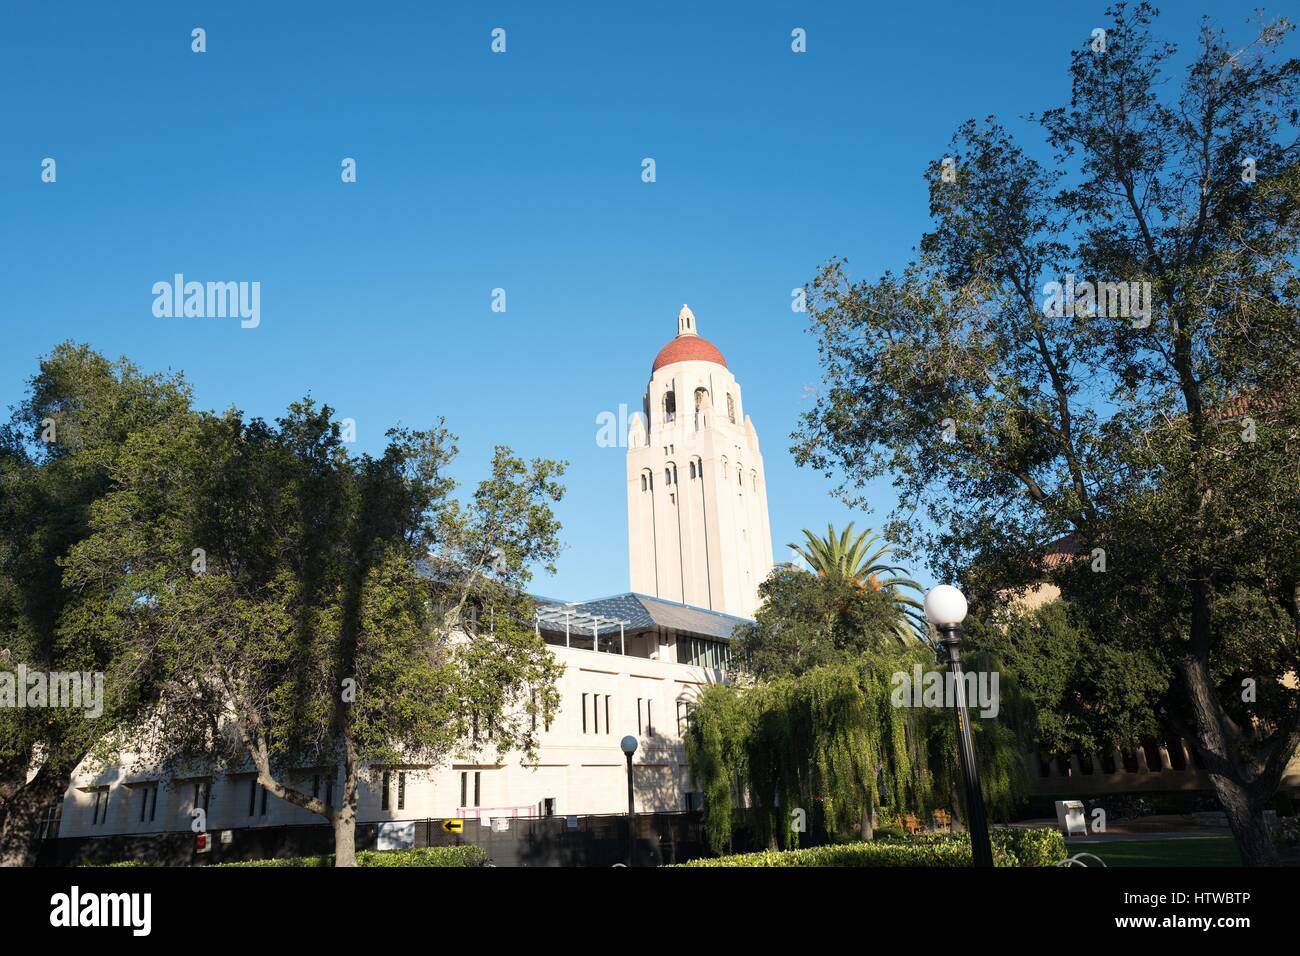 Hoover tower viewed from across a quad at Stanford University in the Silicon Valley town of Stanford, California, November 13, 2016. Stock Photo